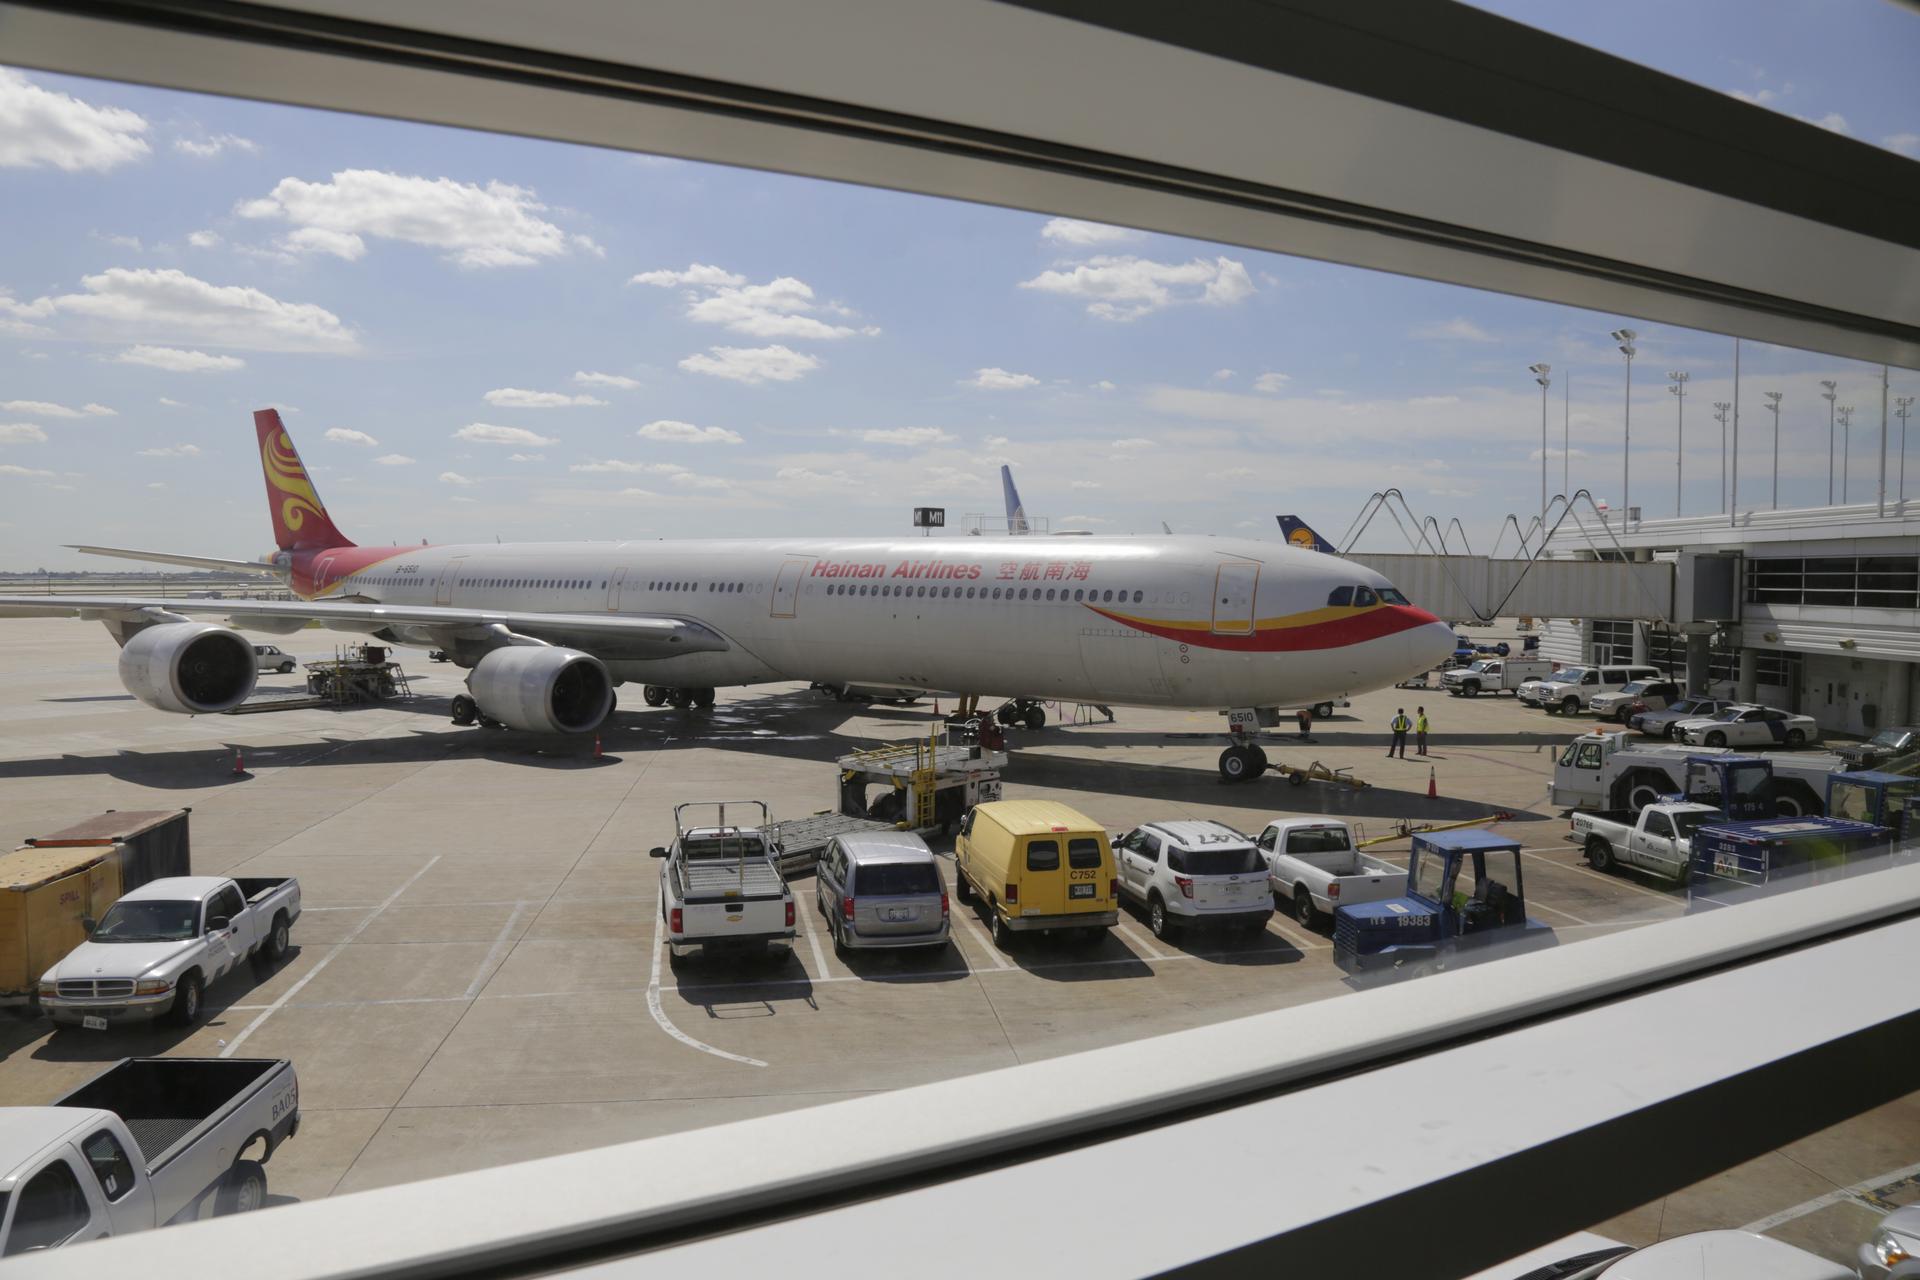 Hainan Airlines is controlled by HNA, which is hit by the long slump in the shipping industry. Photo: AP